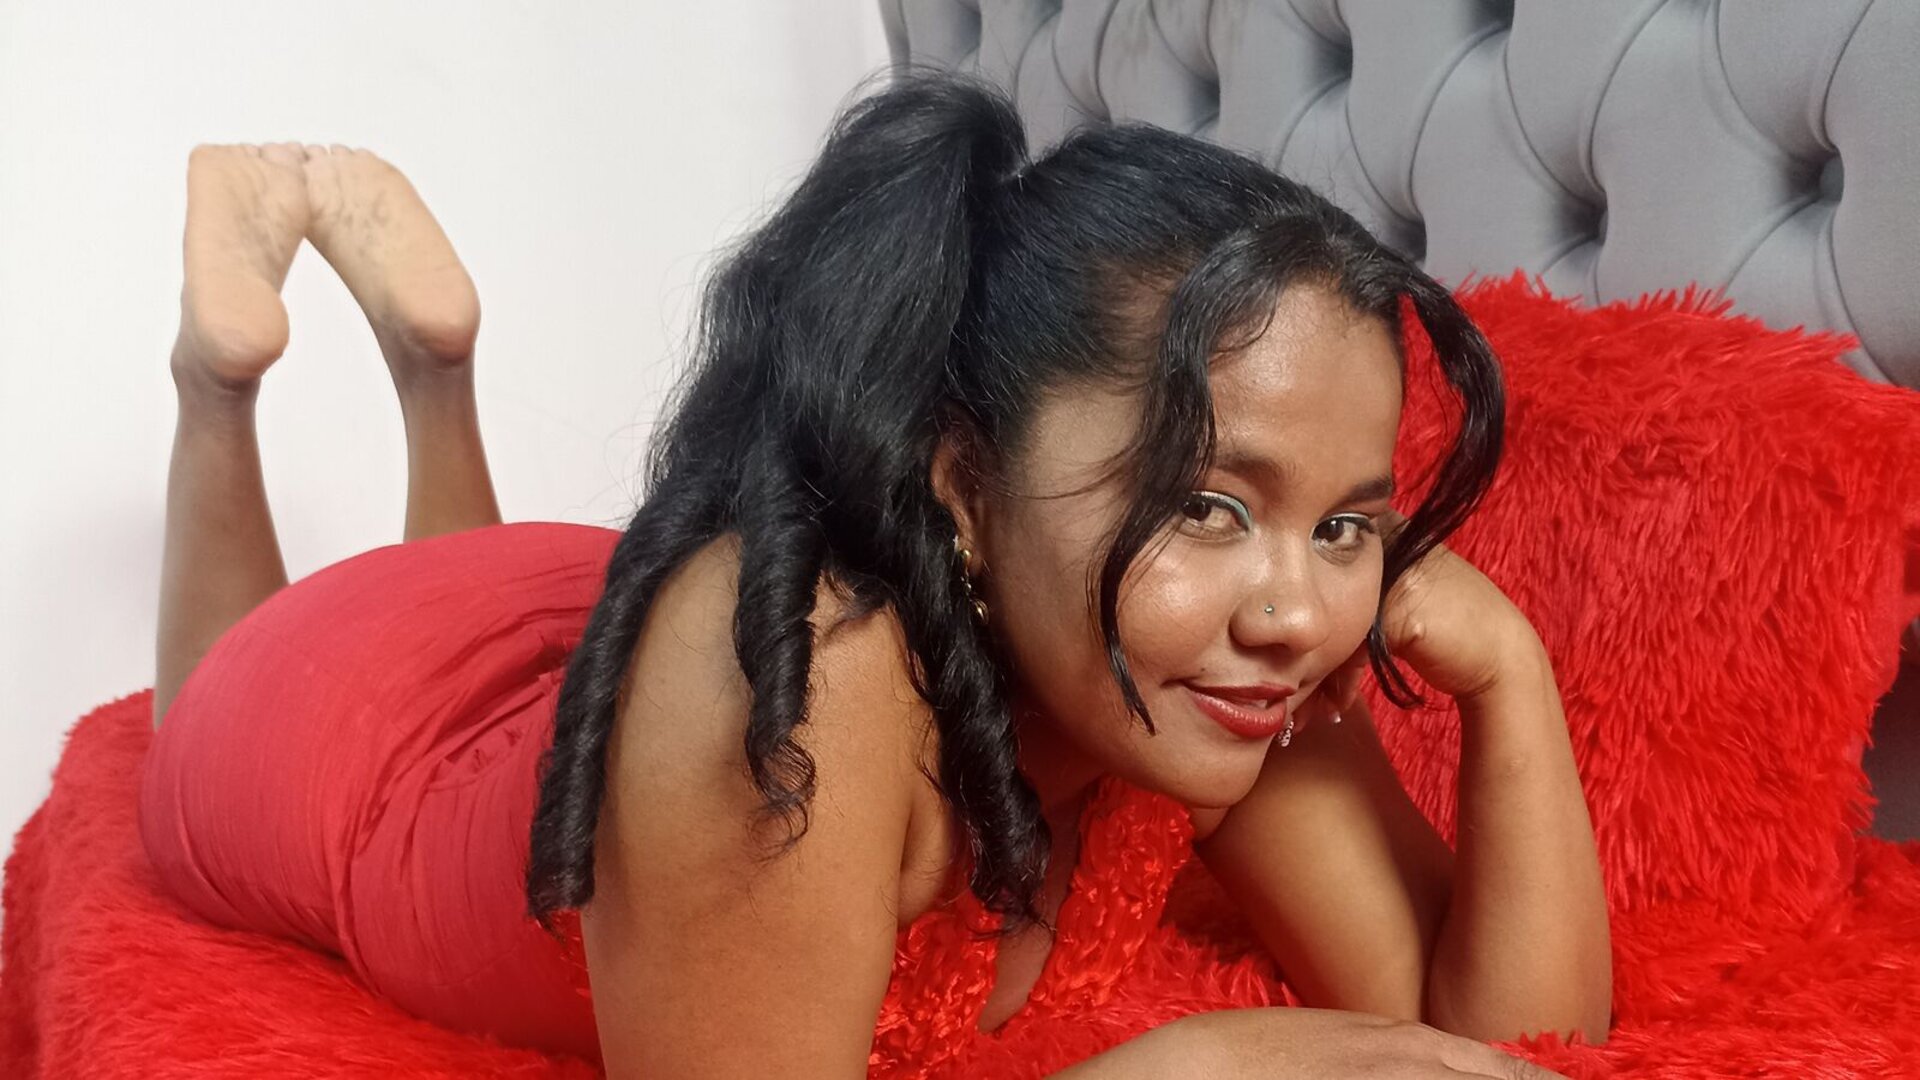 ZullyMyres's Live Nude Chat